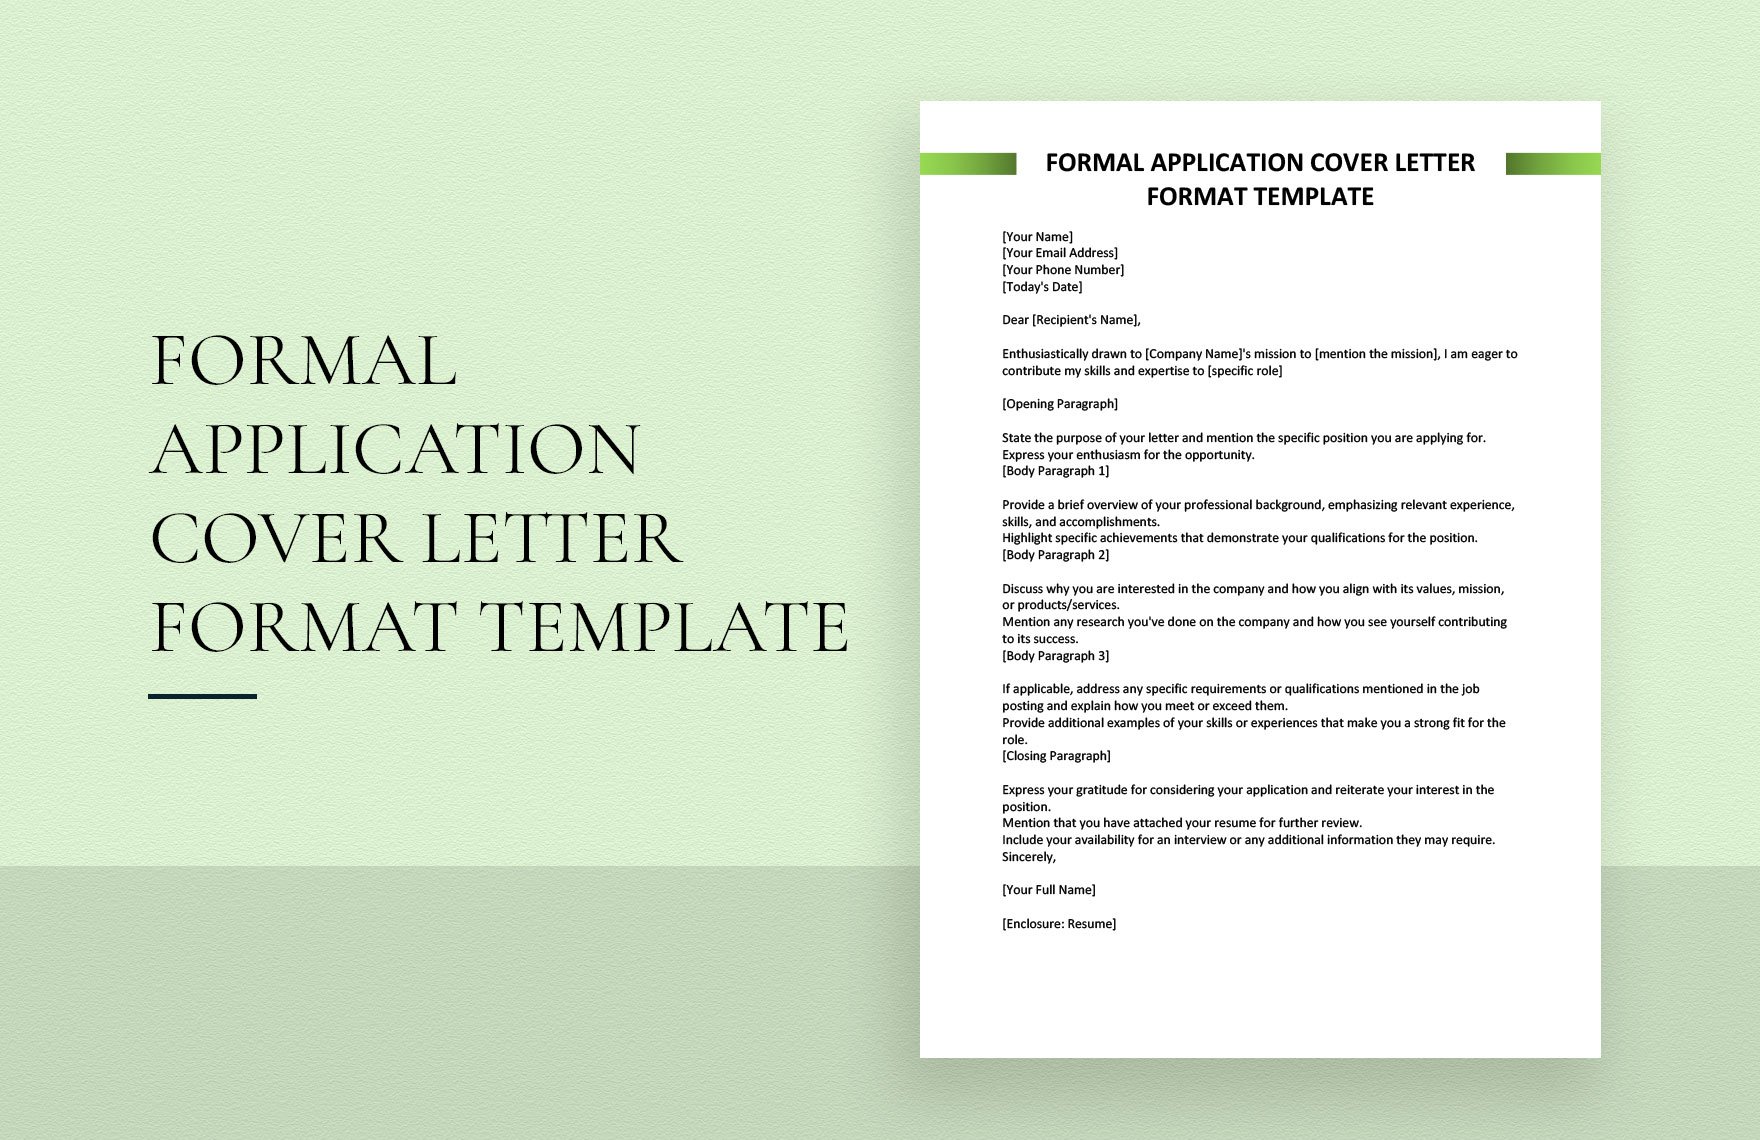 Formal Application Cover Letter Format Template